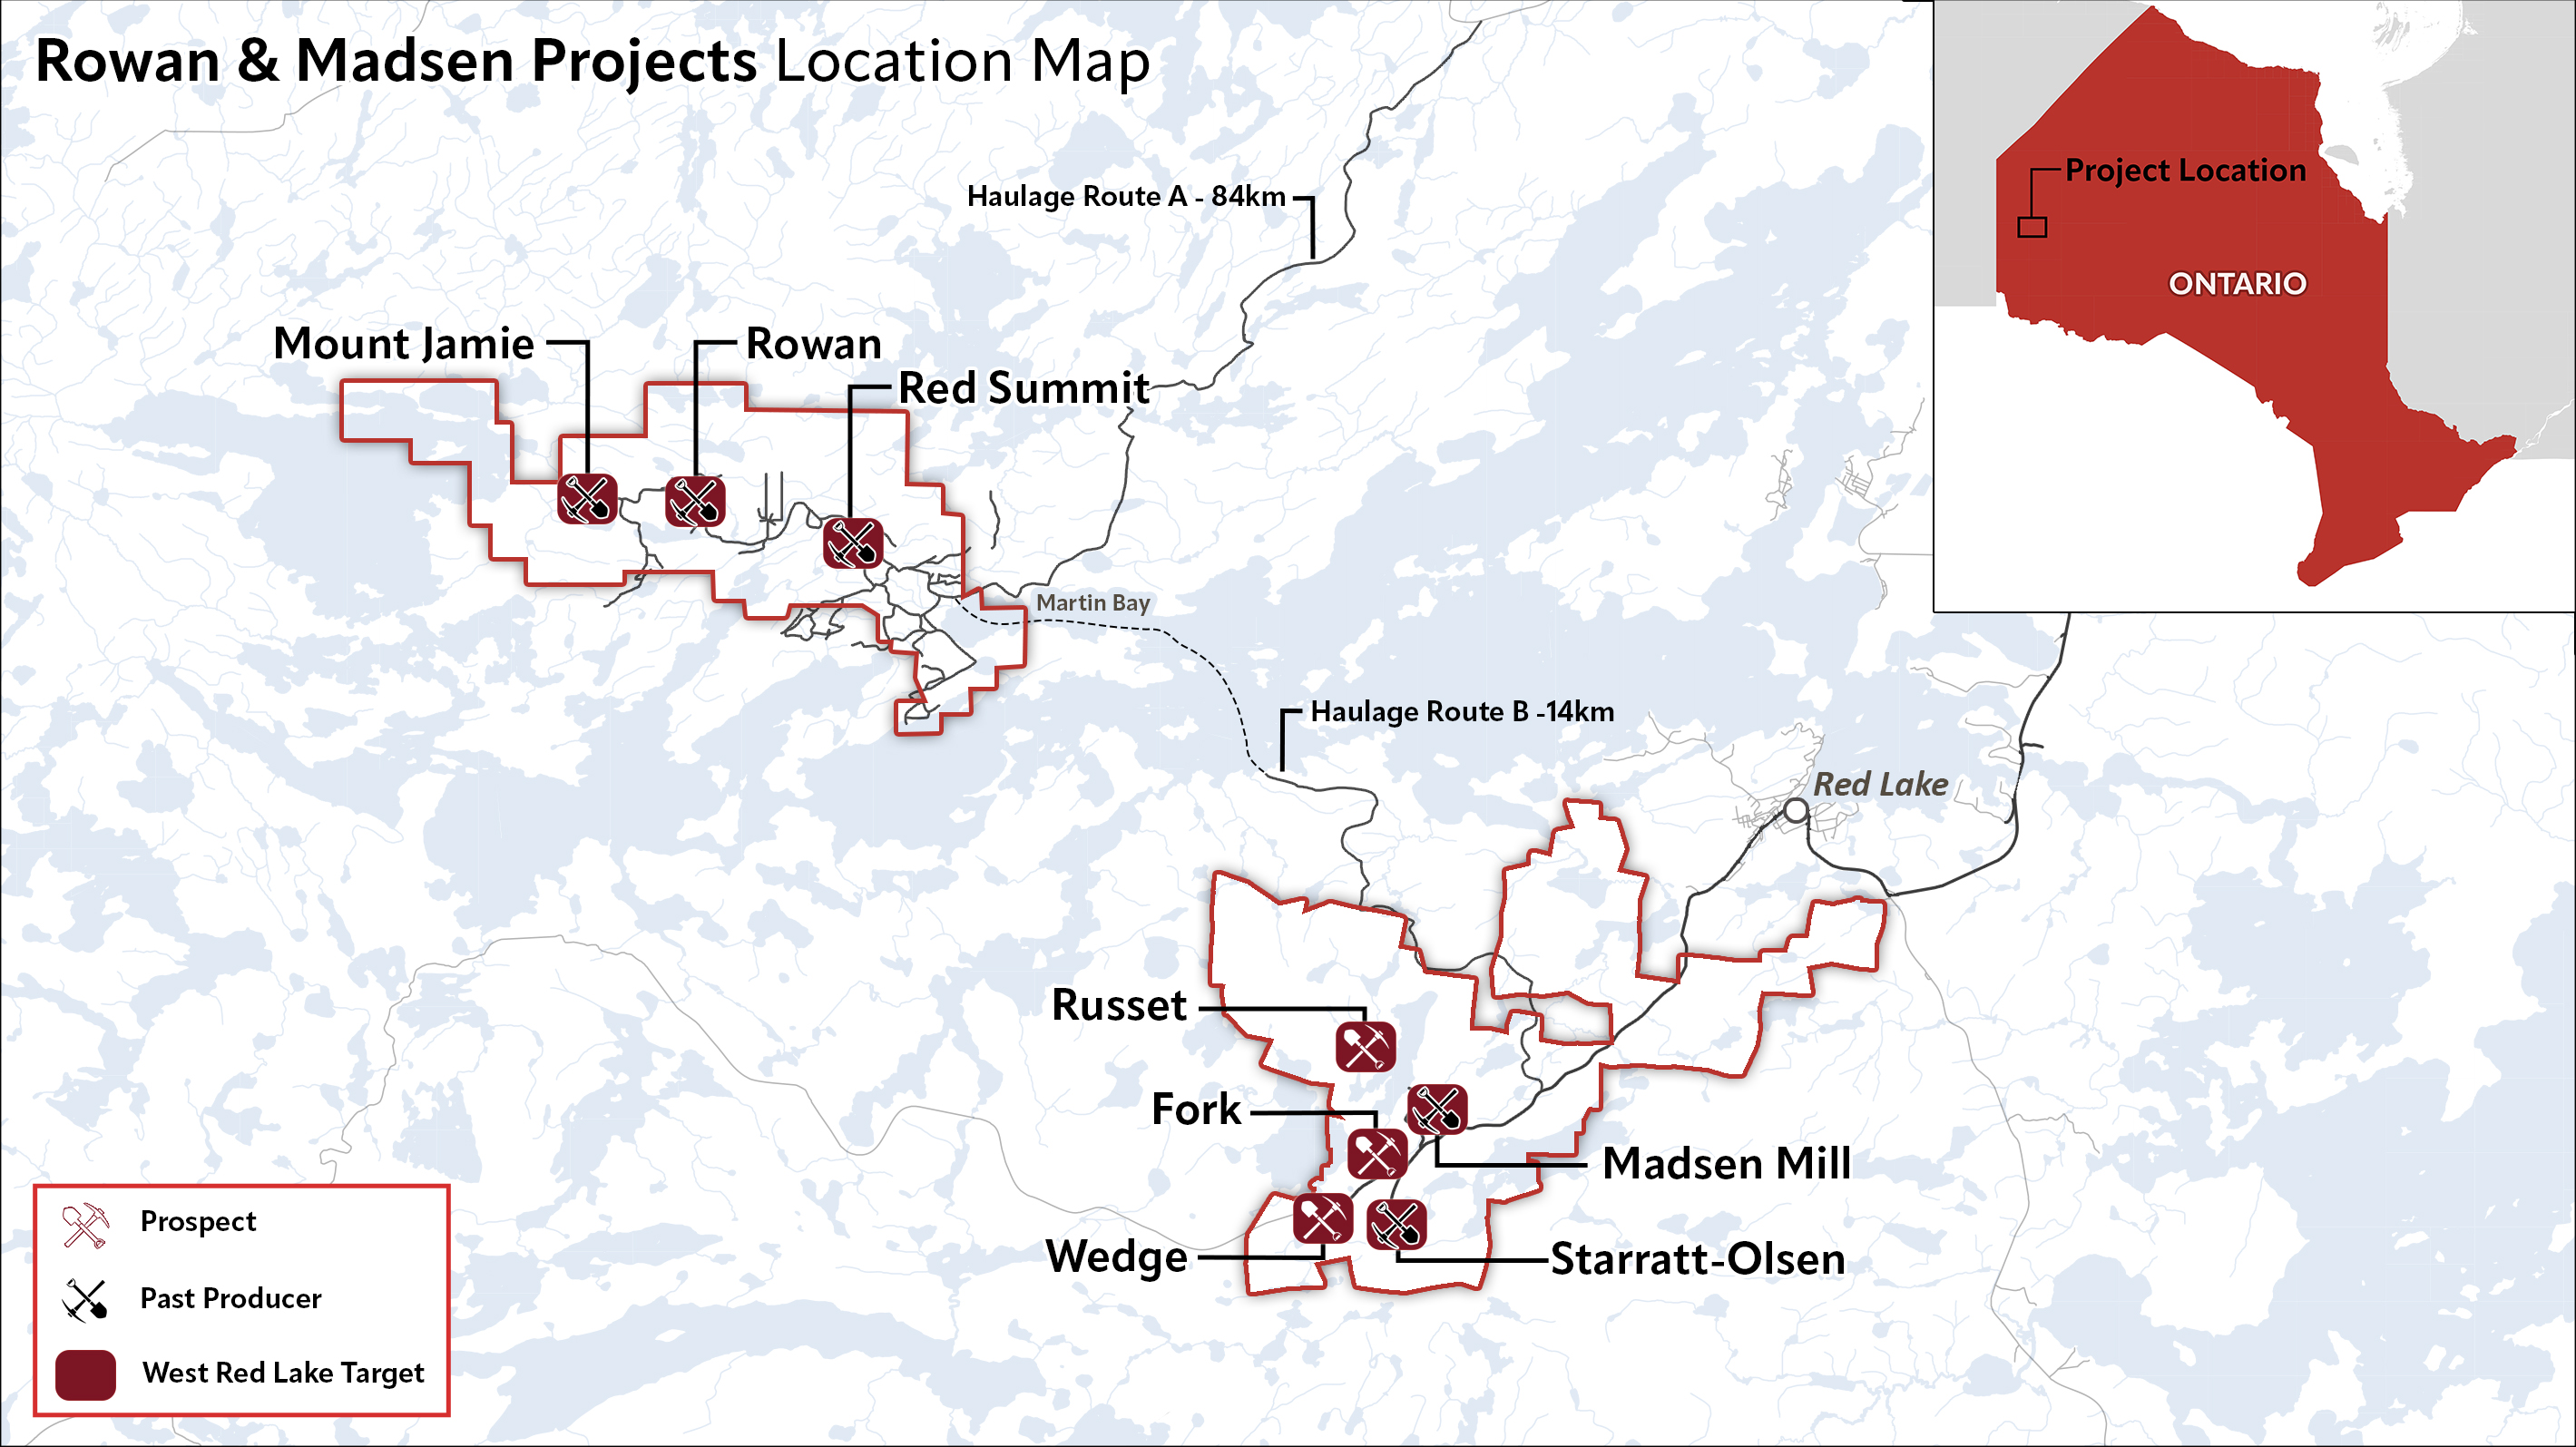 WRLG_Rowan_and_Madsen_Projects_Location_Map